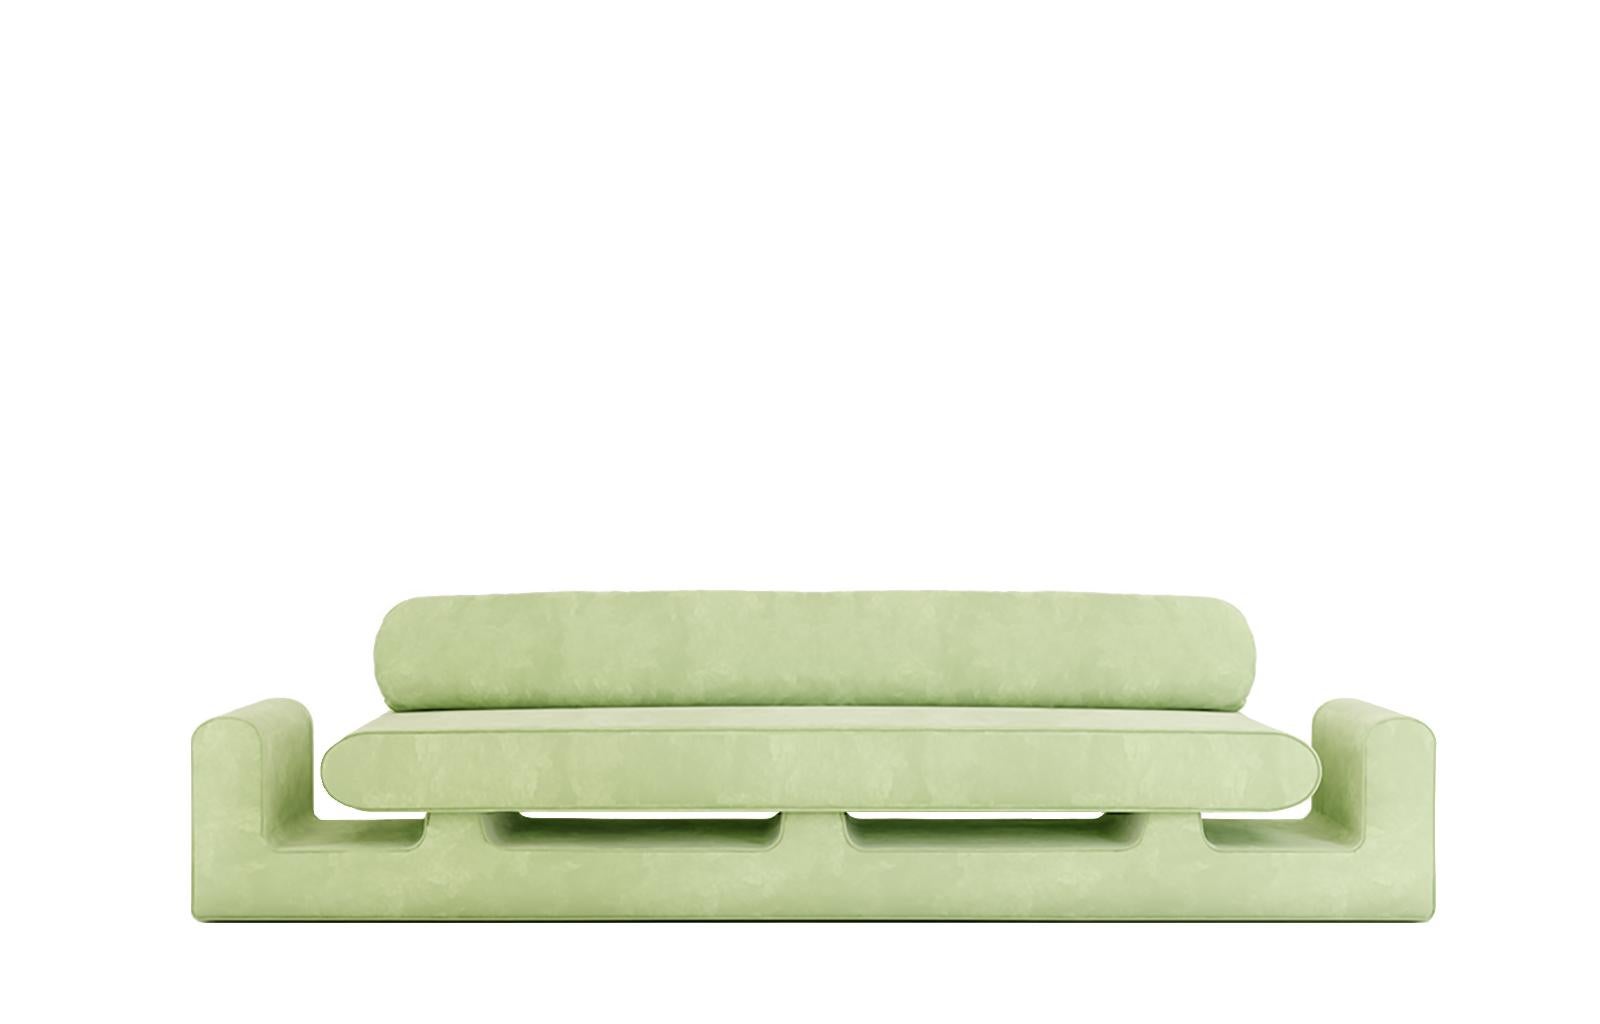 Hug green sofa by Rejo Studio.
Dimensions: D 315 x W 95 x H 76 cm.
Materials: wooden structure, with velvet.
Also available in different colours. 

Long comfortable hug. The hug sofa features two welcoming chubby arms and a magical handy space